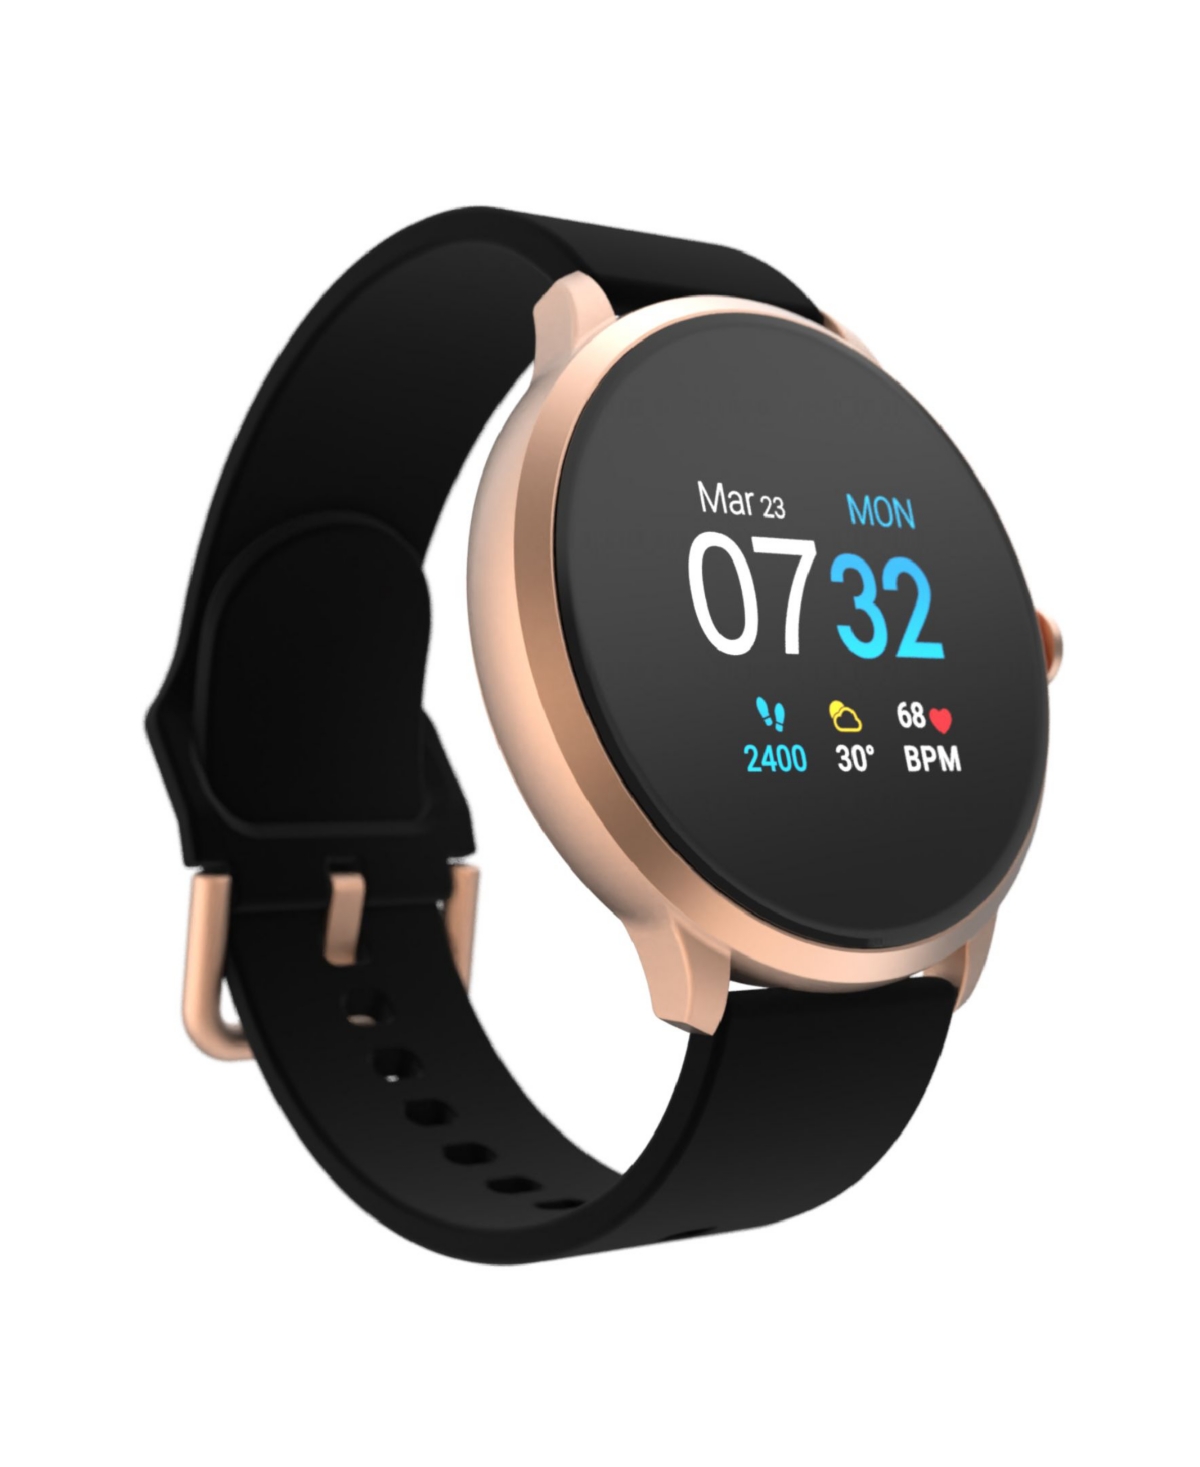 Sport 3 Unisex Touchscreen Smartwatch: Rose Gold Case with Black Silicone Strap 45mm - Black